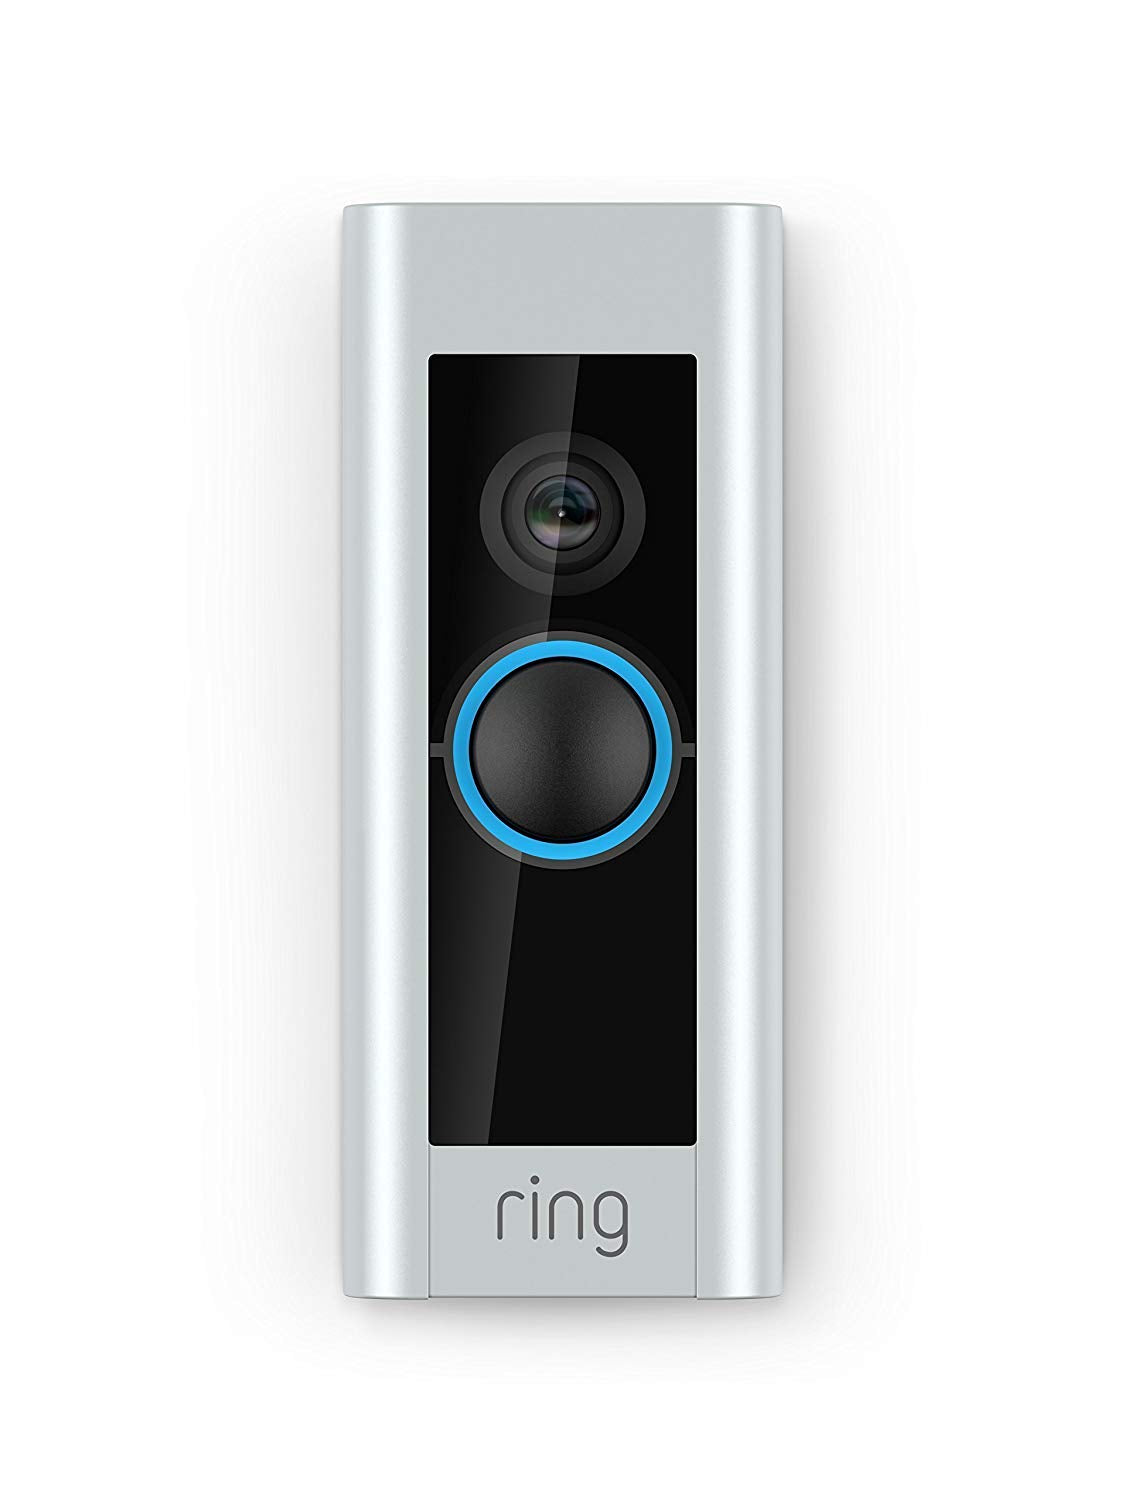 Ring Video Doorbell Pro, with HD Video, Motion Activated Alerts - Satin Nickel (Refurbished)